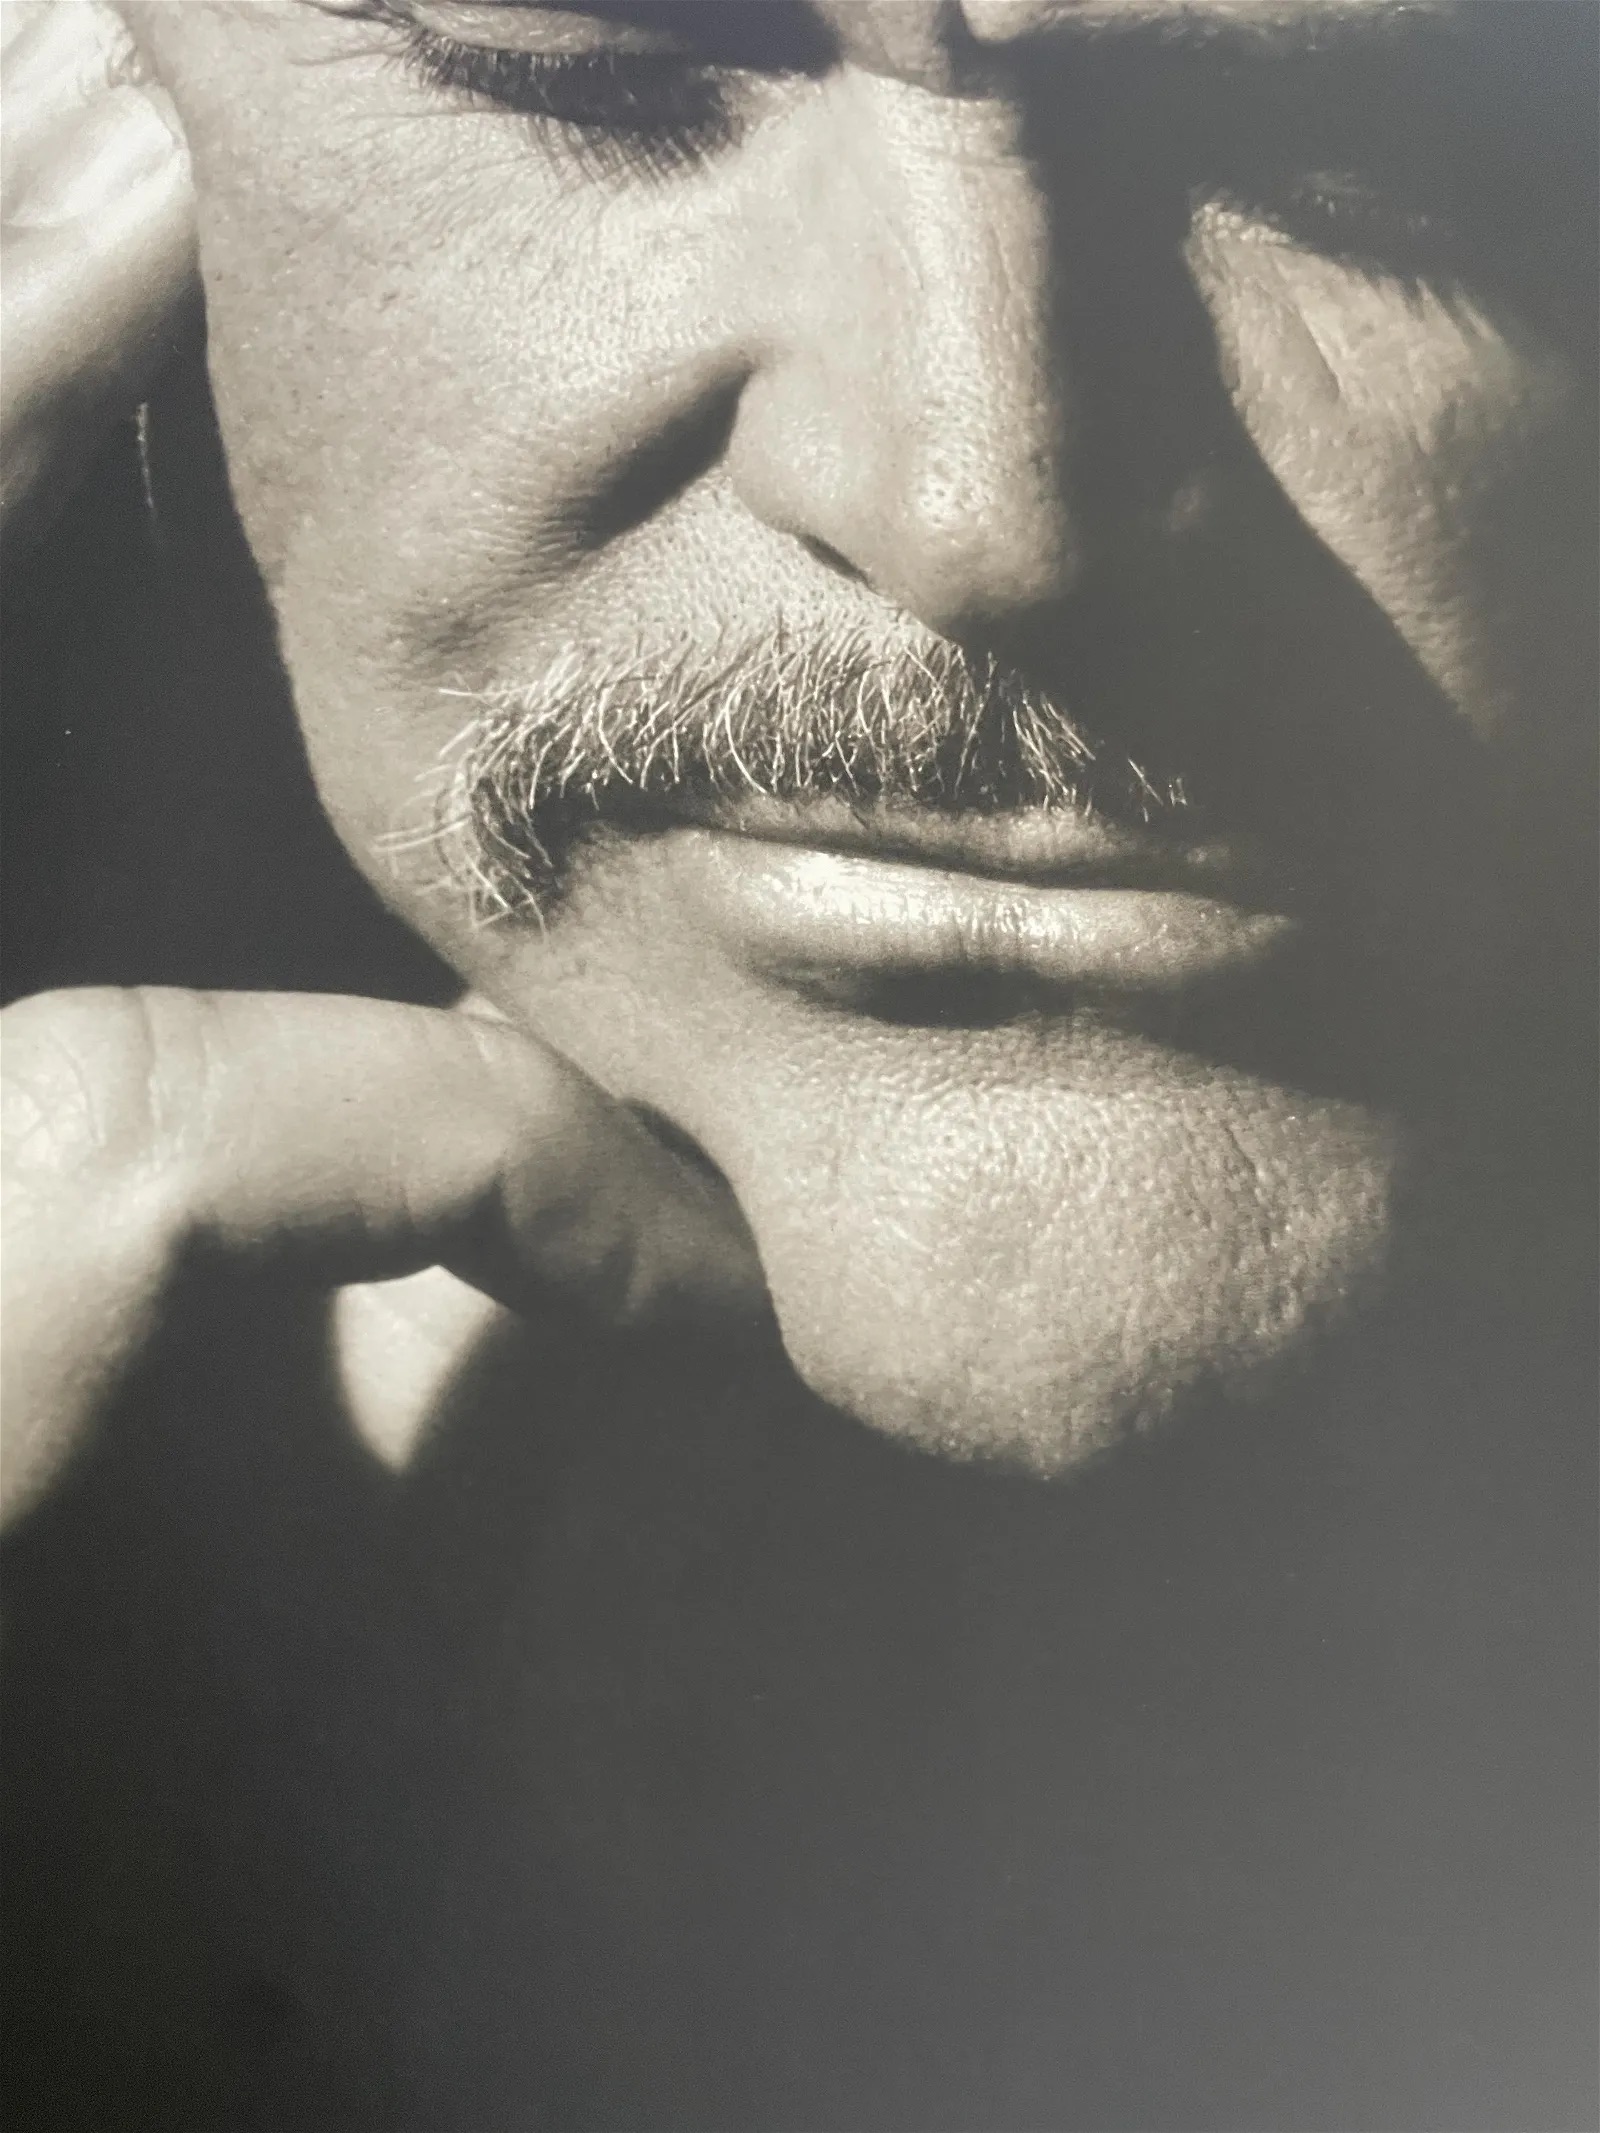 Herb Ritts "Sean Connery, Hollywood, 1989" Print - Image 6 of 6